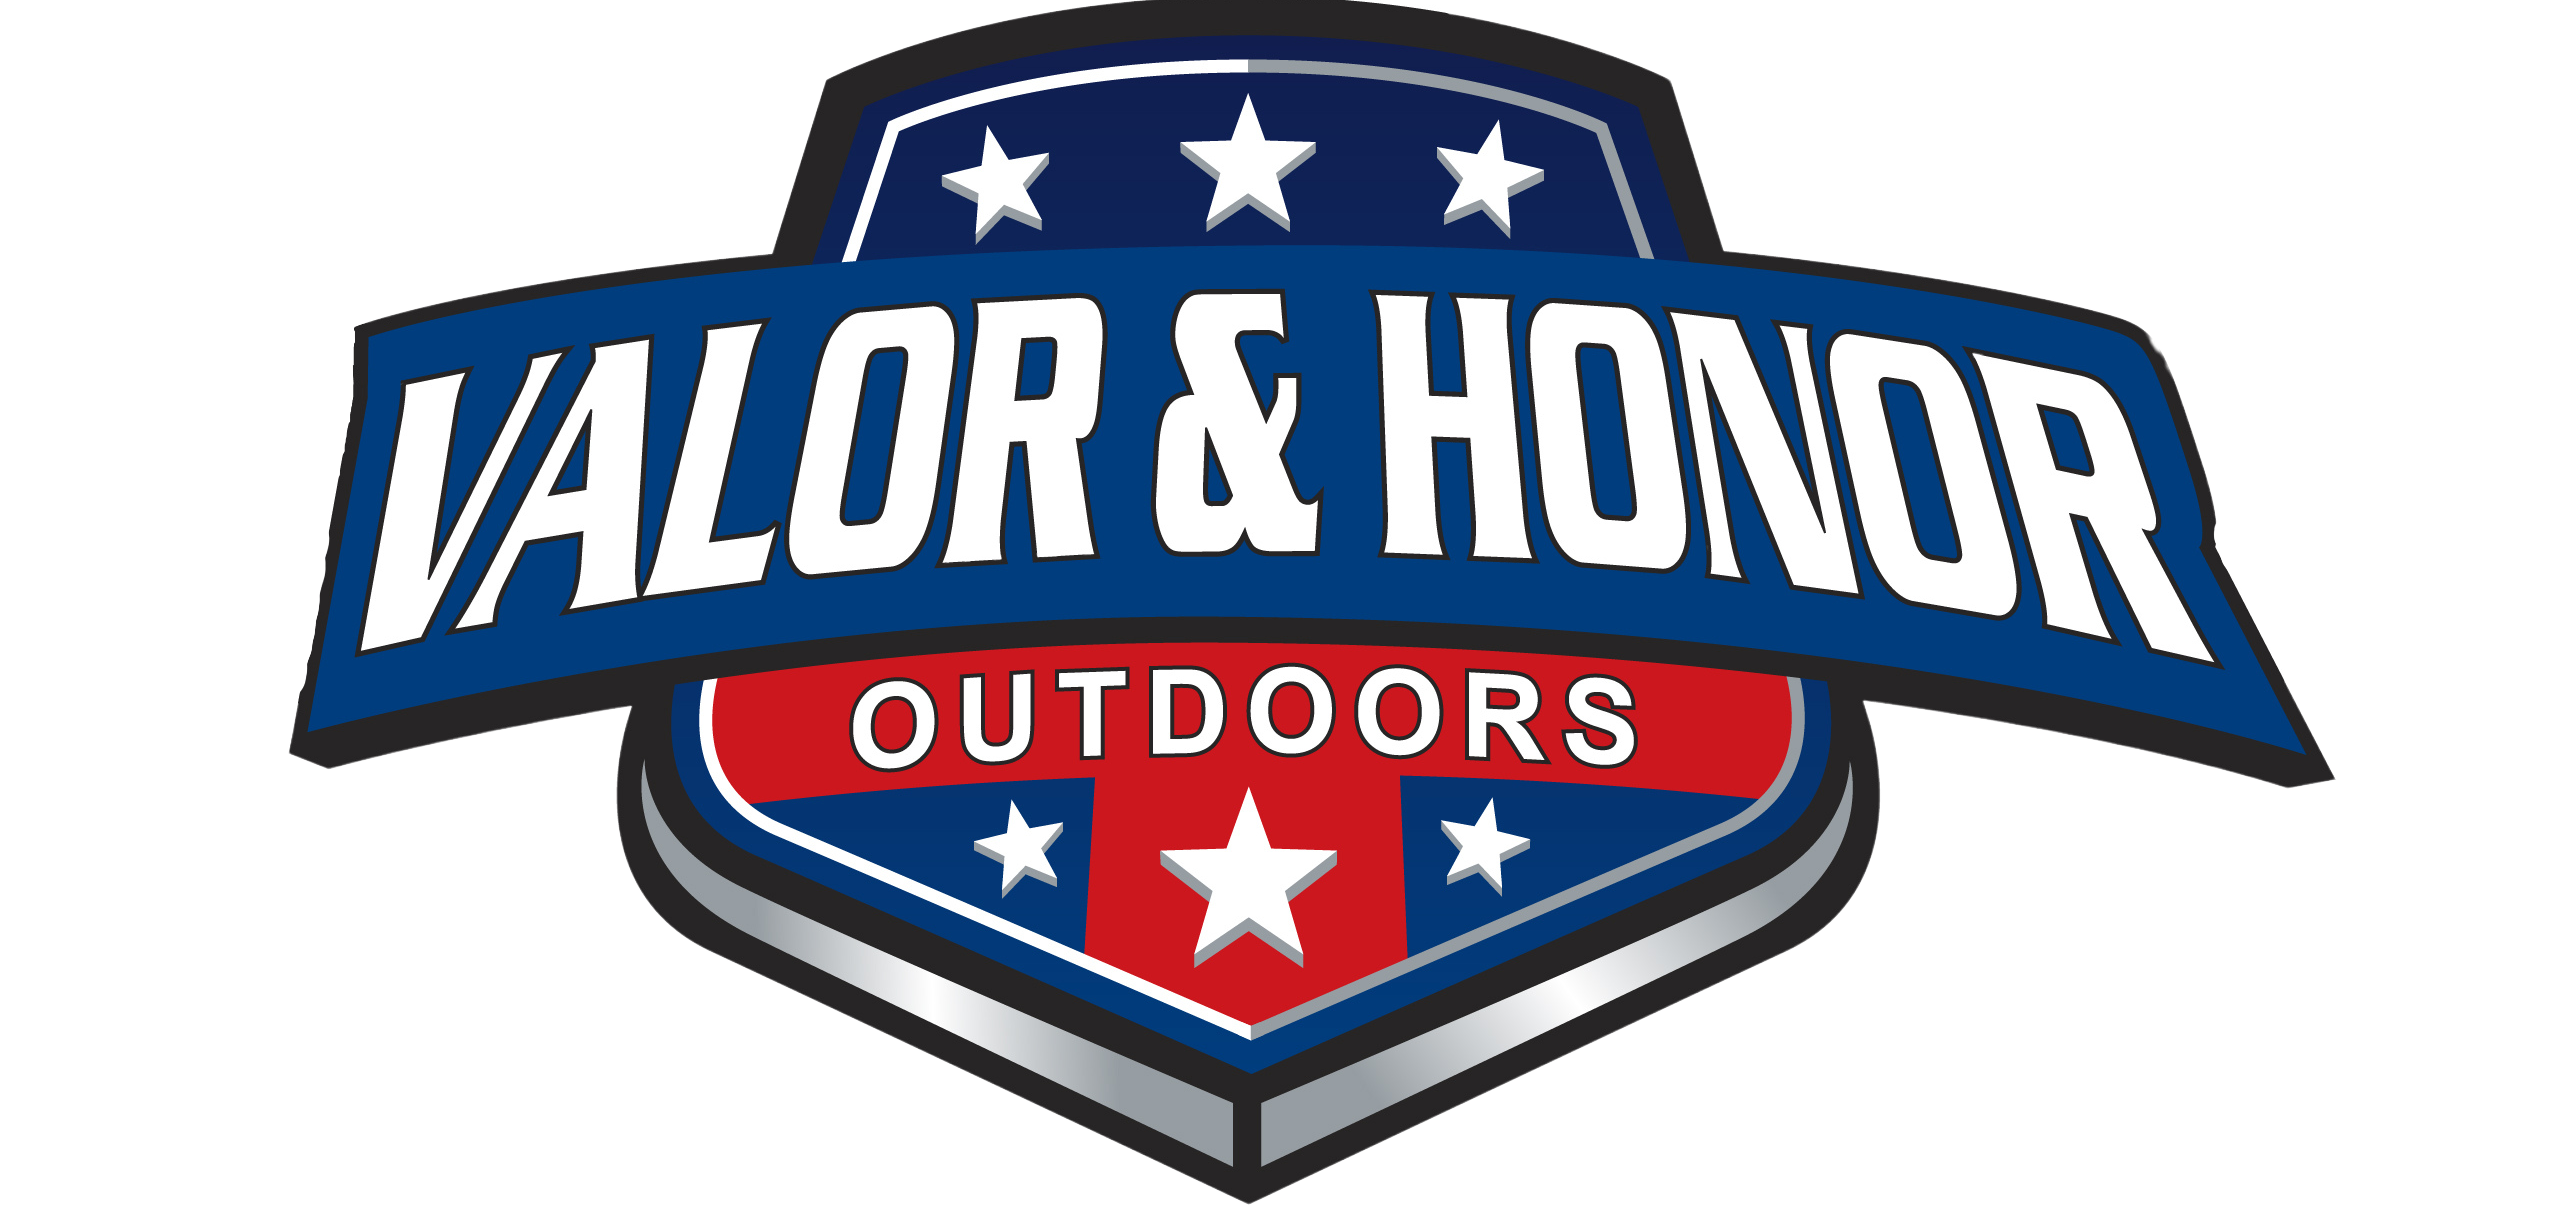 Valor & Honor Outdoors